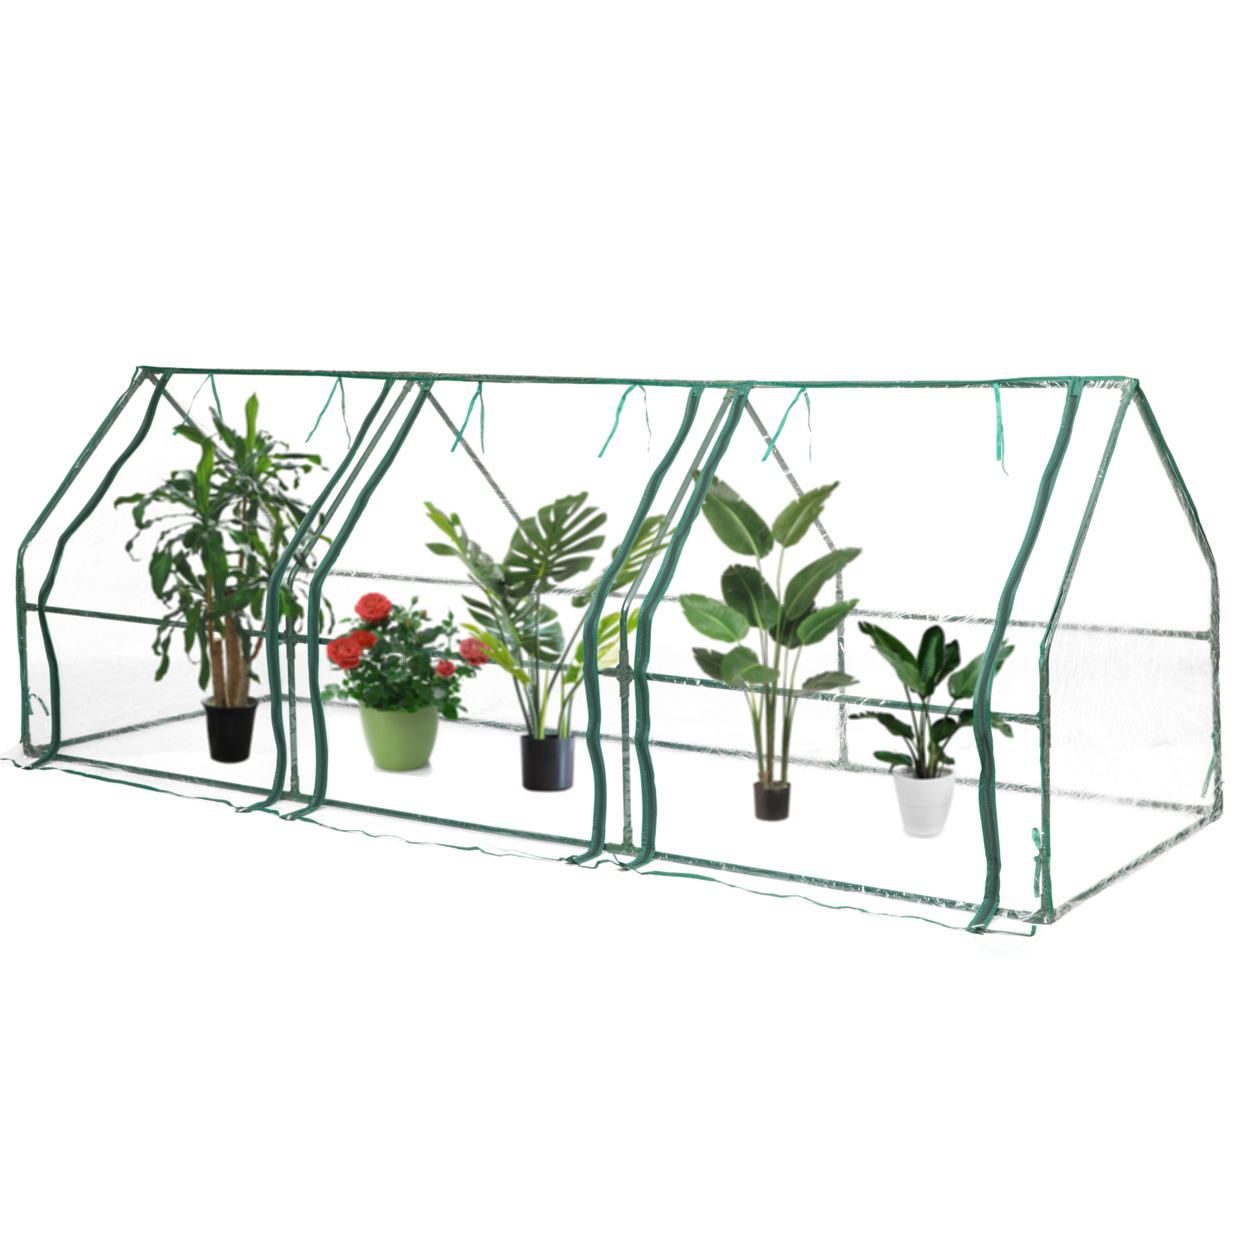 Green Outdoor Waterproof Portable Plant Greenhouse With 2 Clear Zippered Windows - Medium